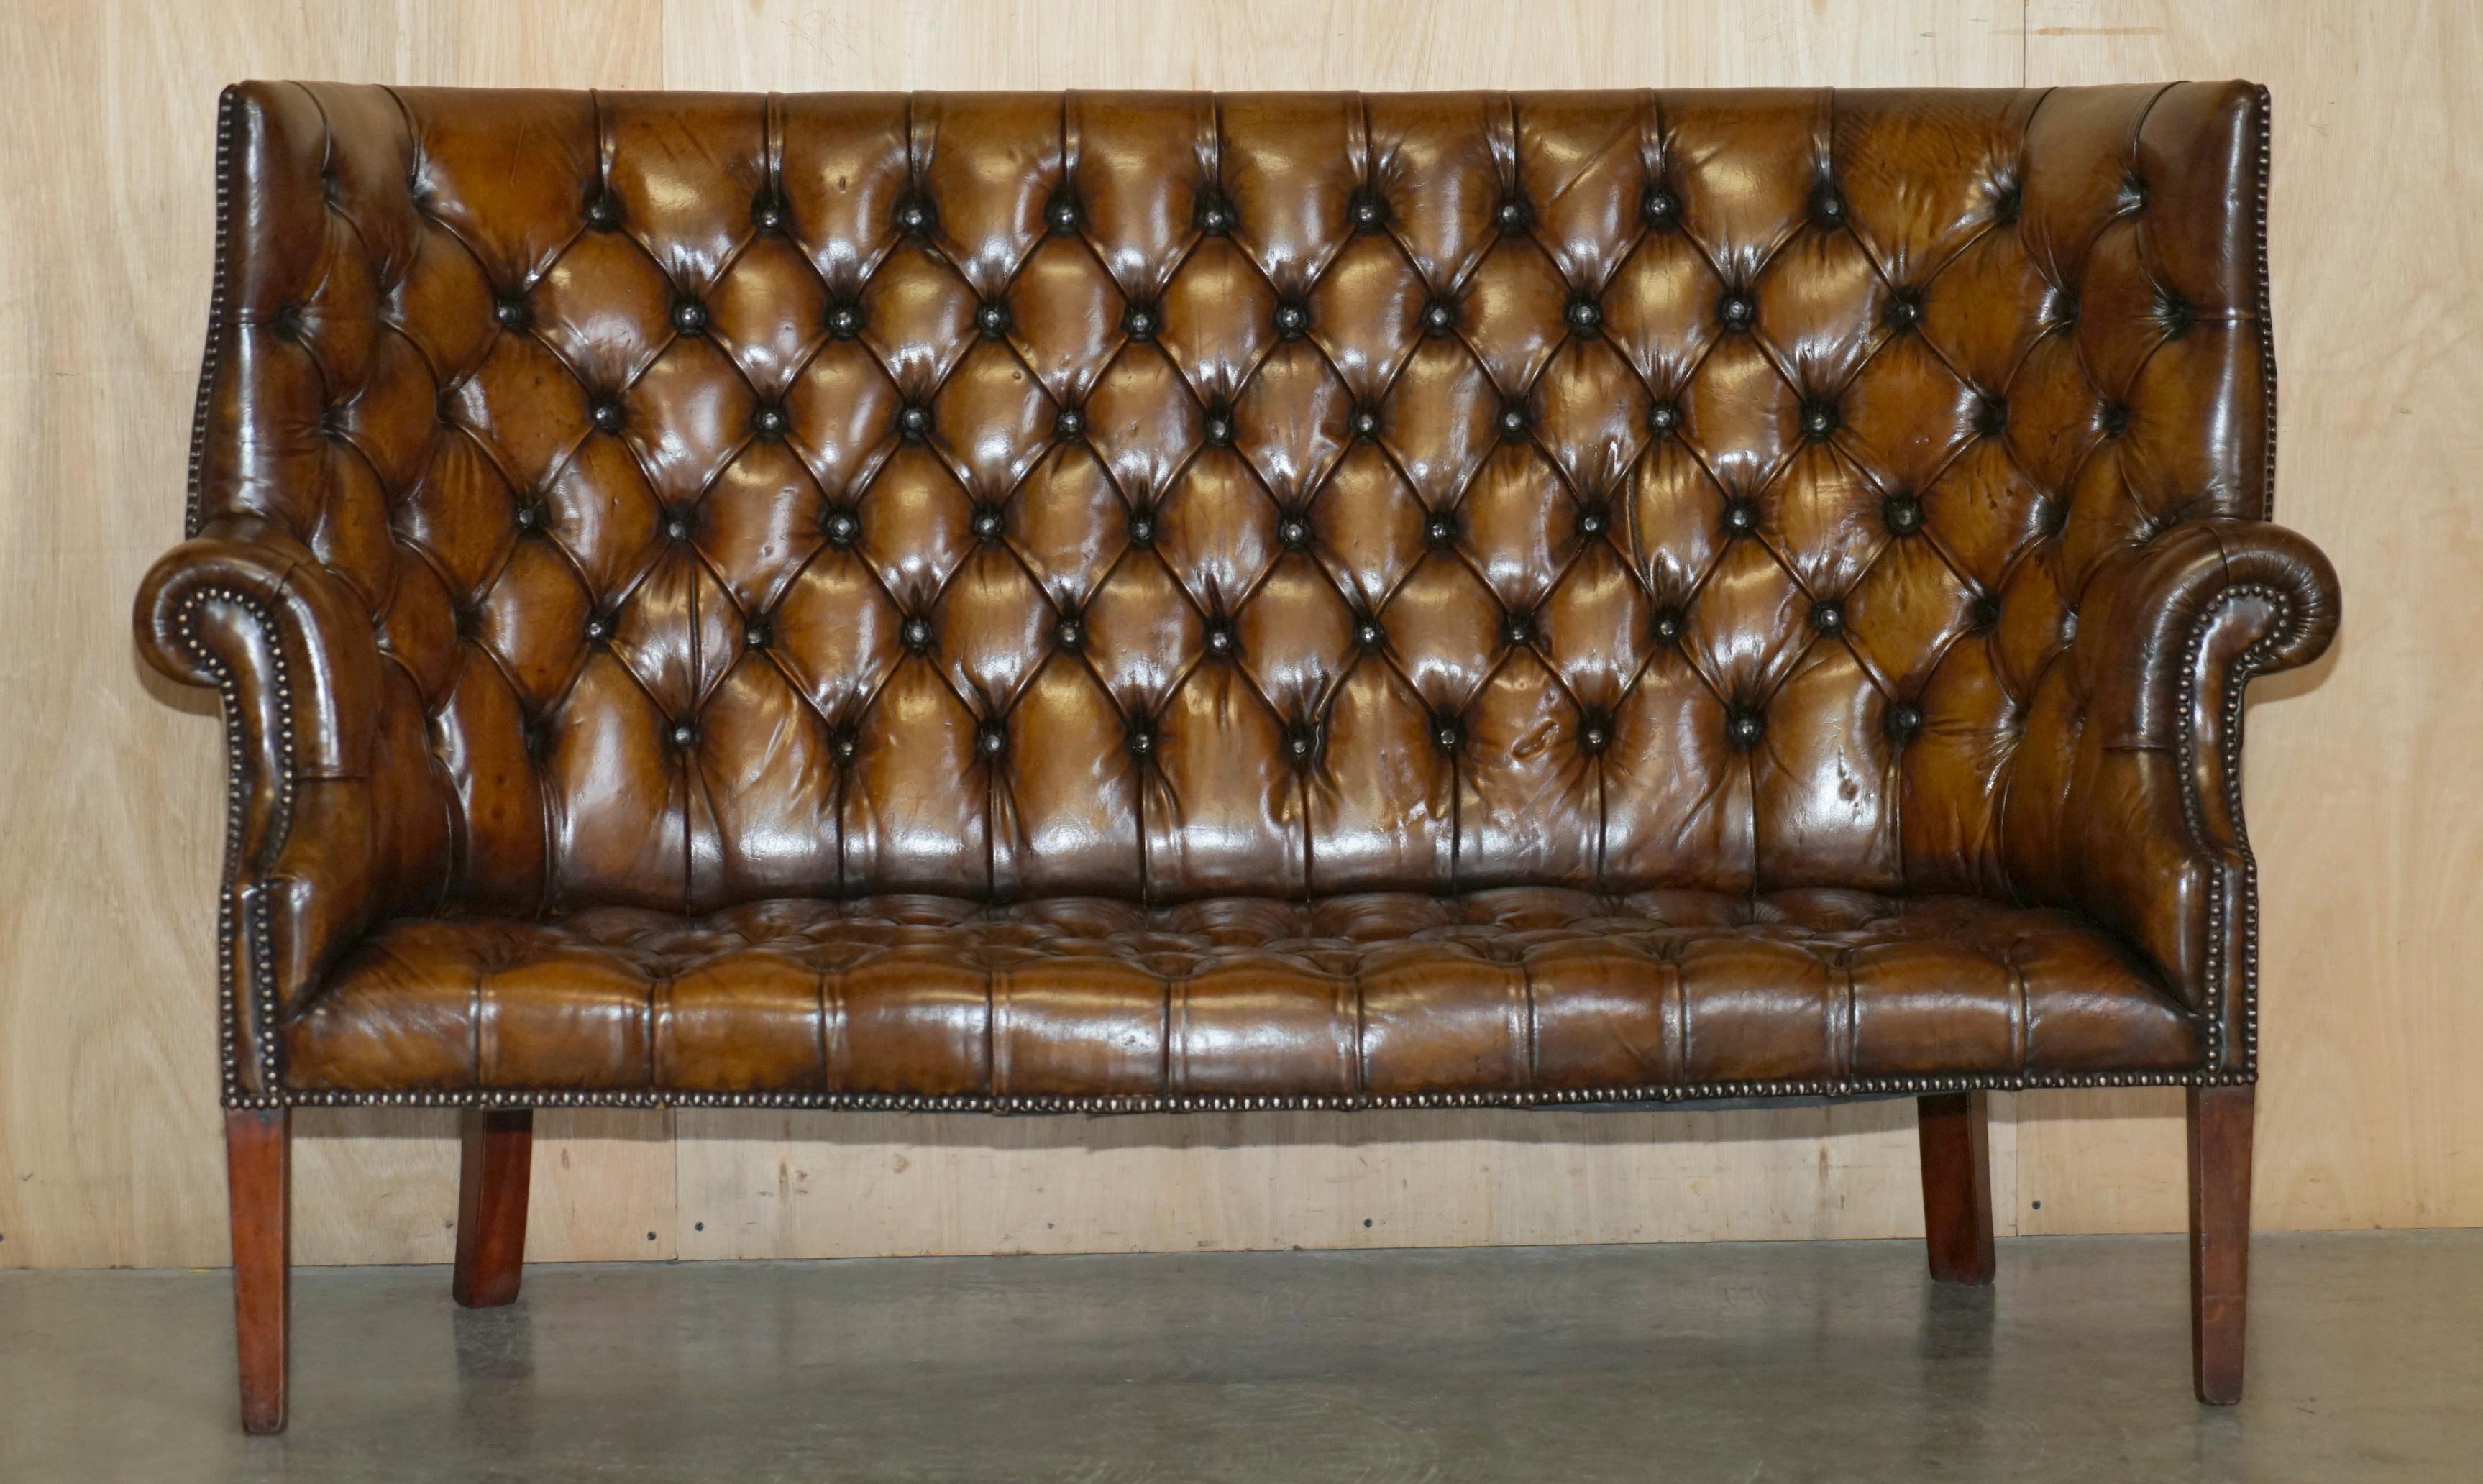 Royal House Antiques

Royal House Antiques is delighted to offer for sale this super rare, highly collectable circa 1940's fully restored Chesterfield Porters Wingback sofa

Please note the delivery fee listed is just a guide, it covers within the